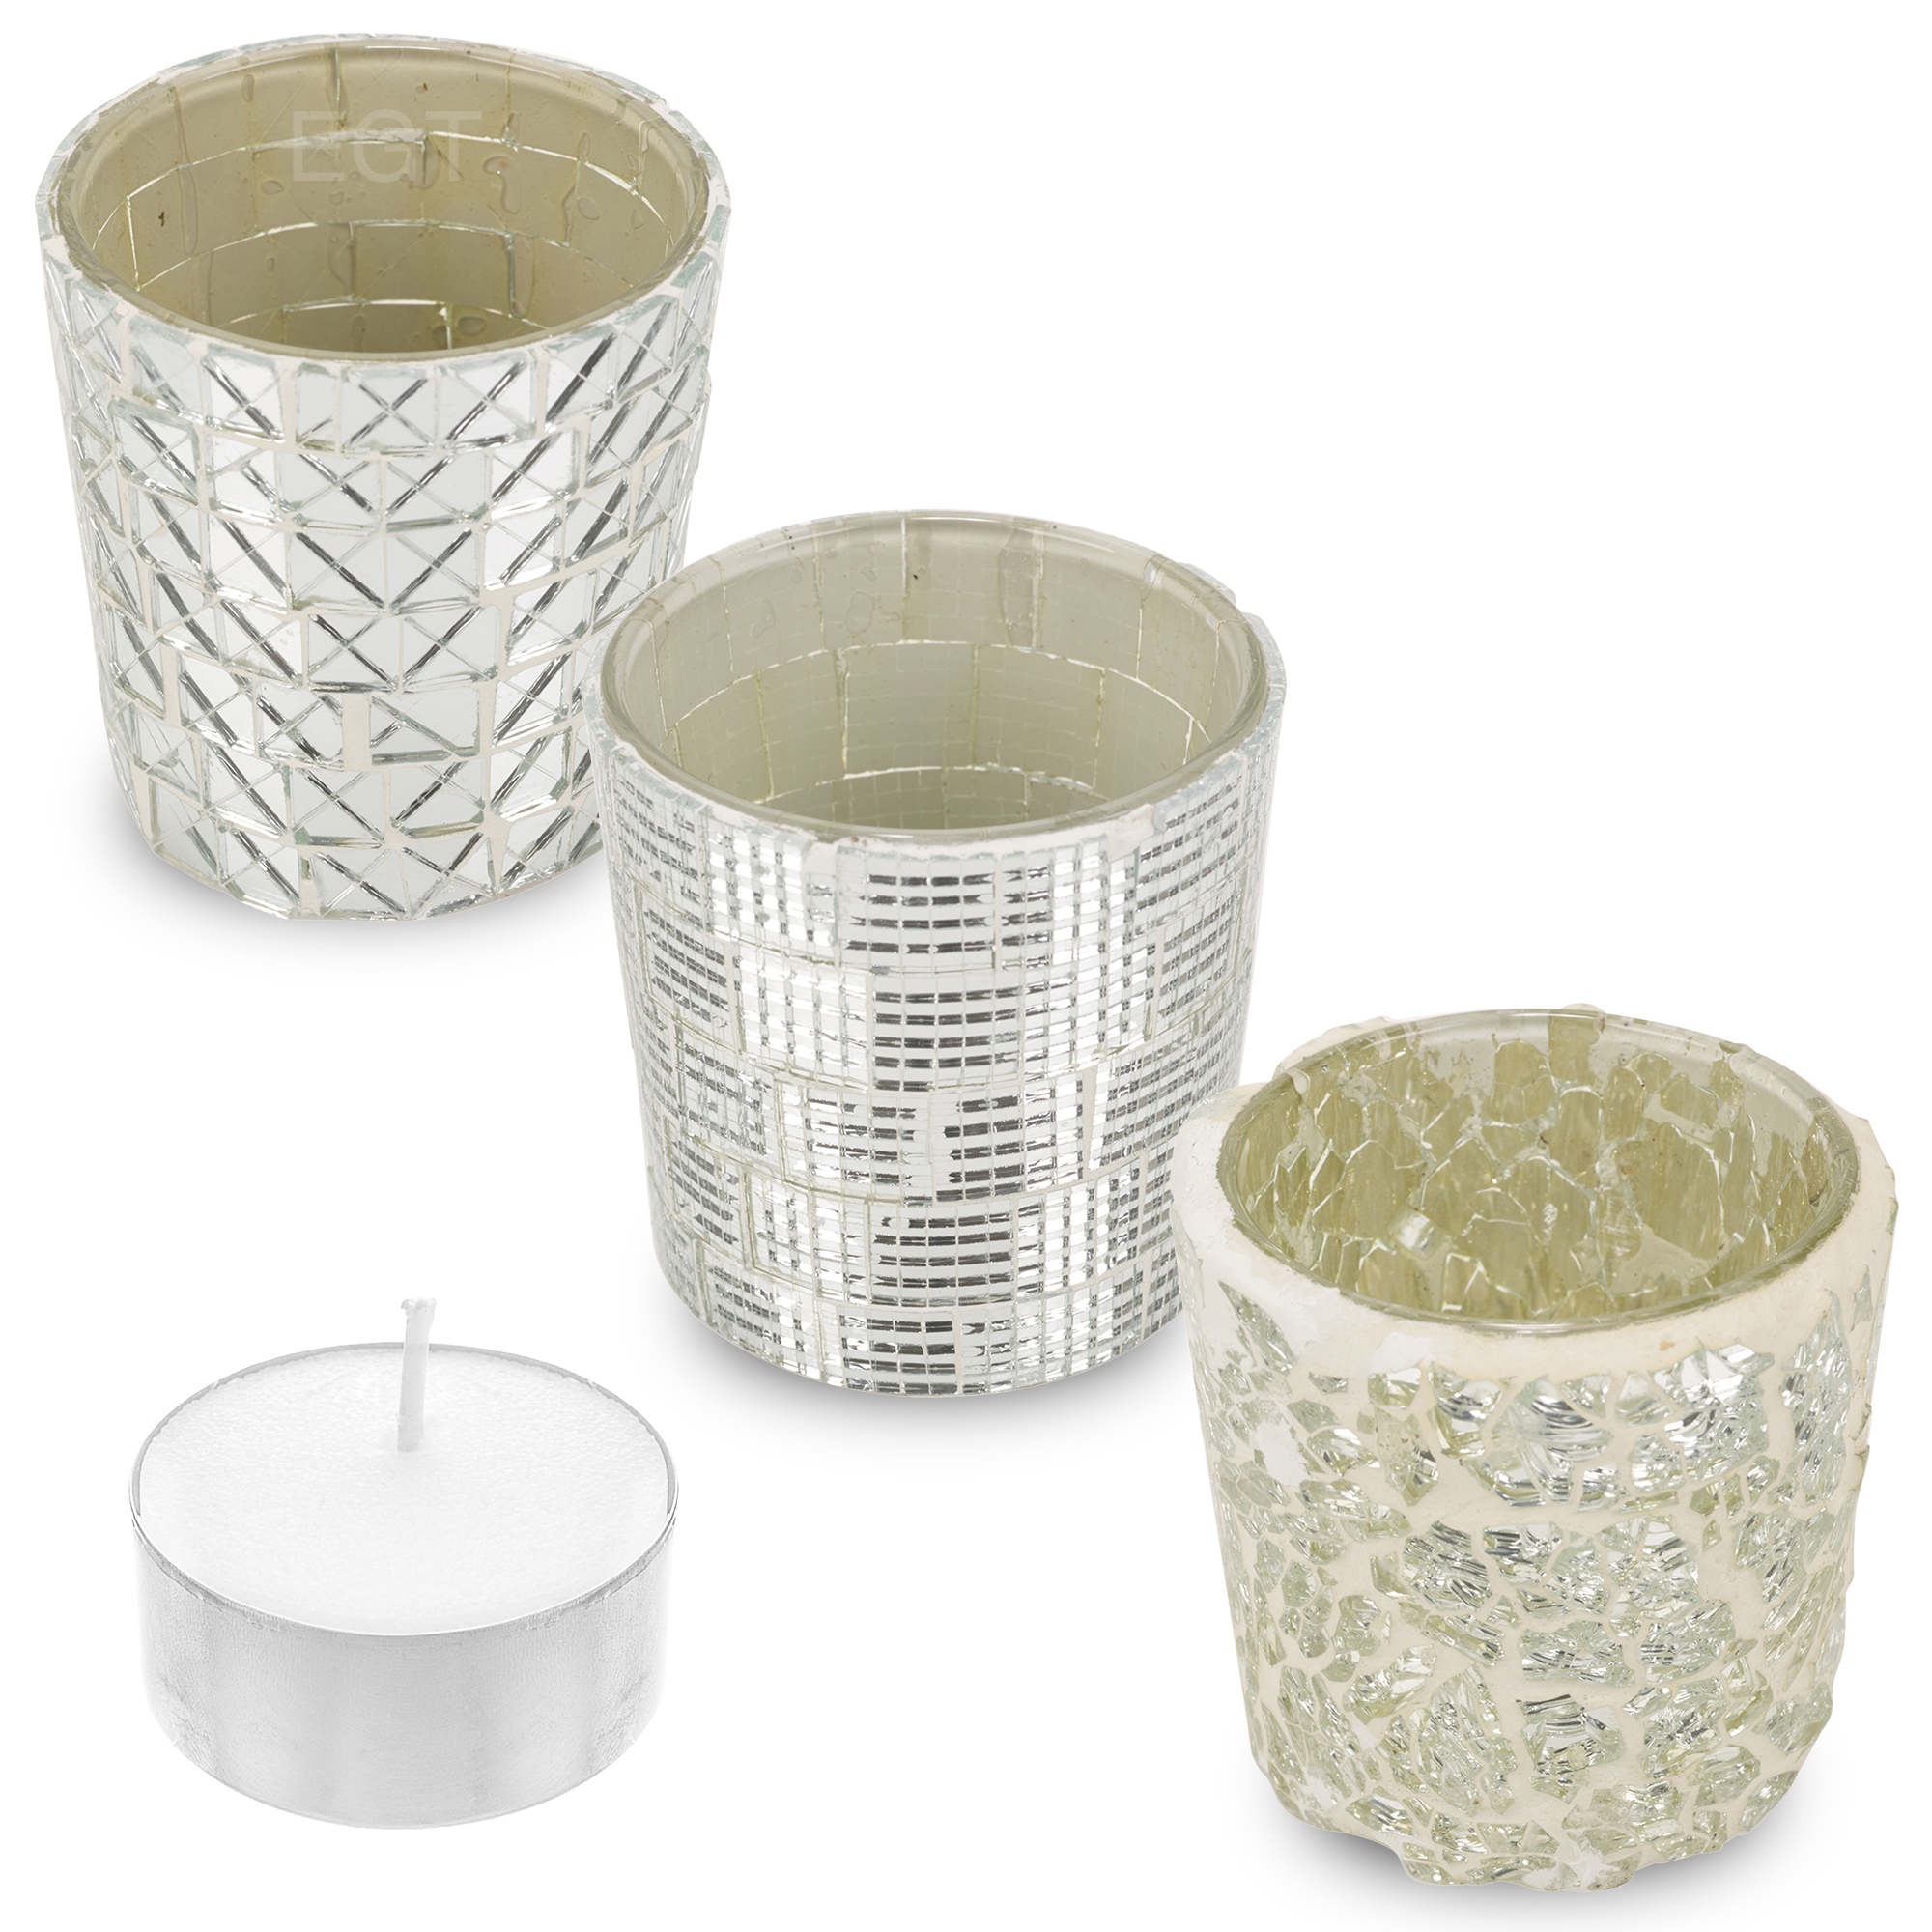 Set Of 3 Glass Candle Tealight Holder Cracked Mosaic Table Centre Piece Wedding Ebay